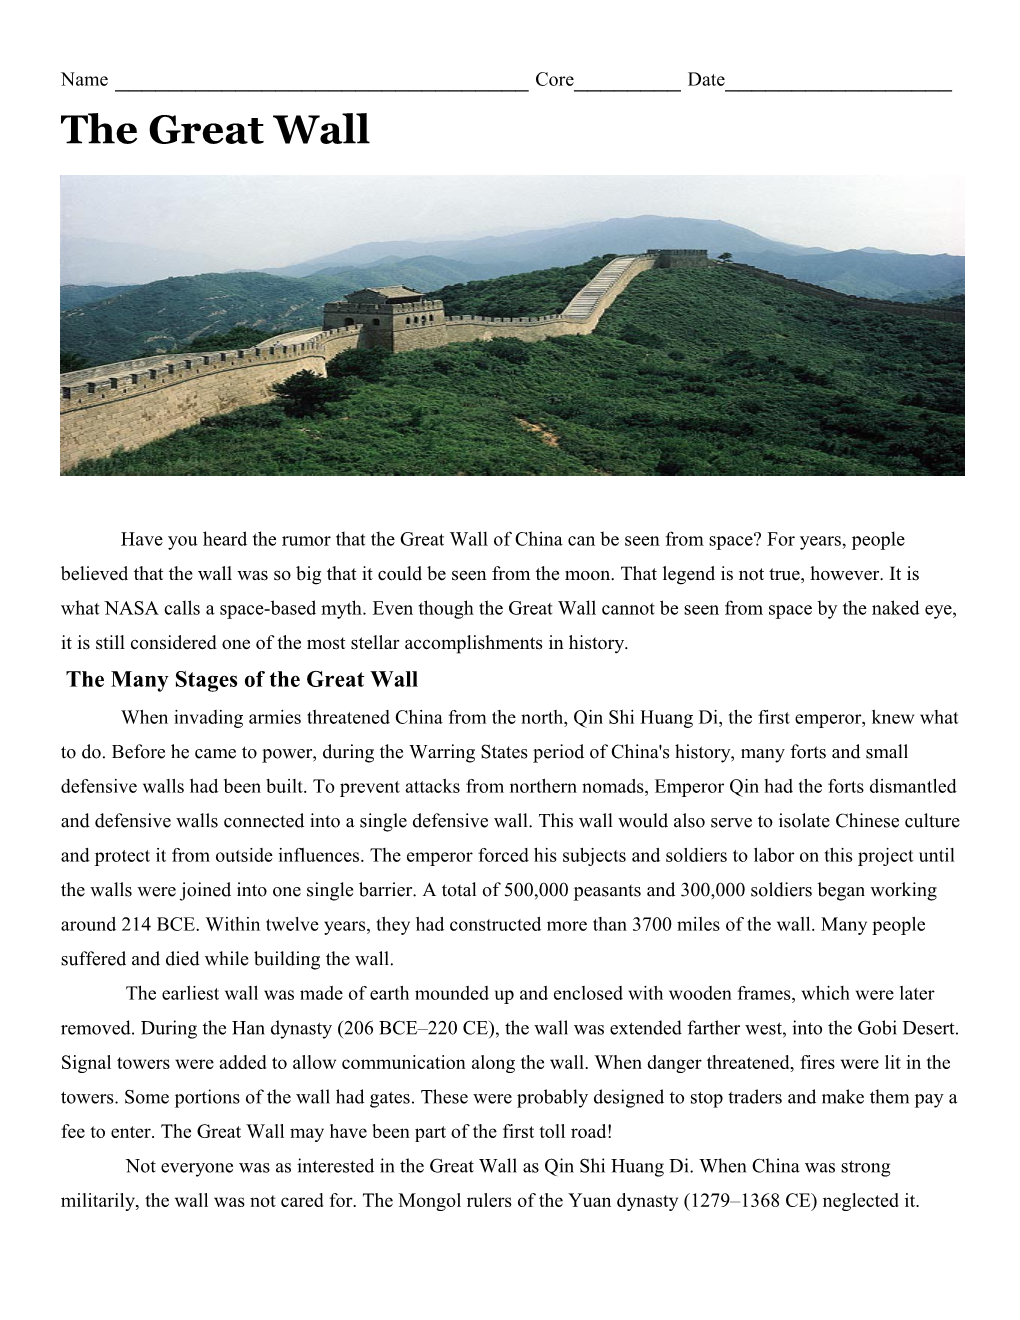 The Many Stages of the Great Wall